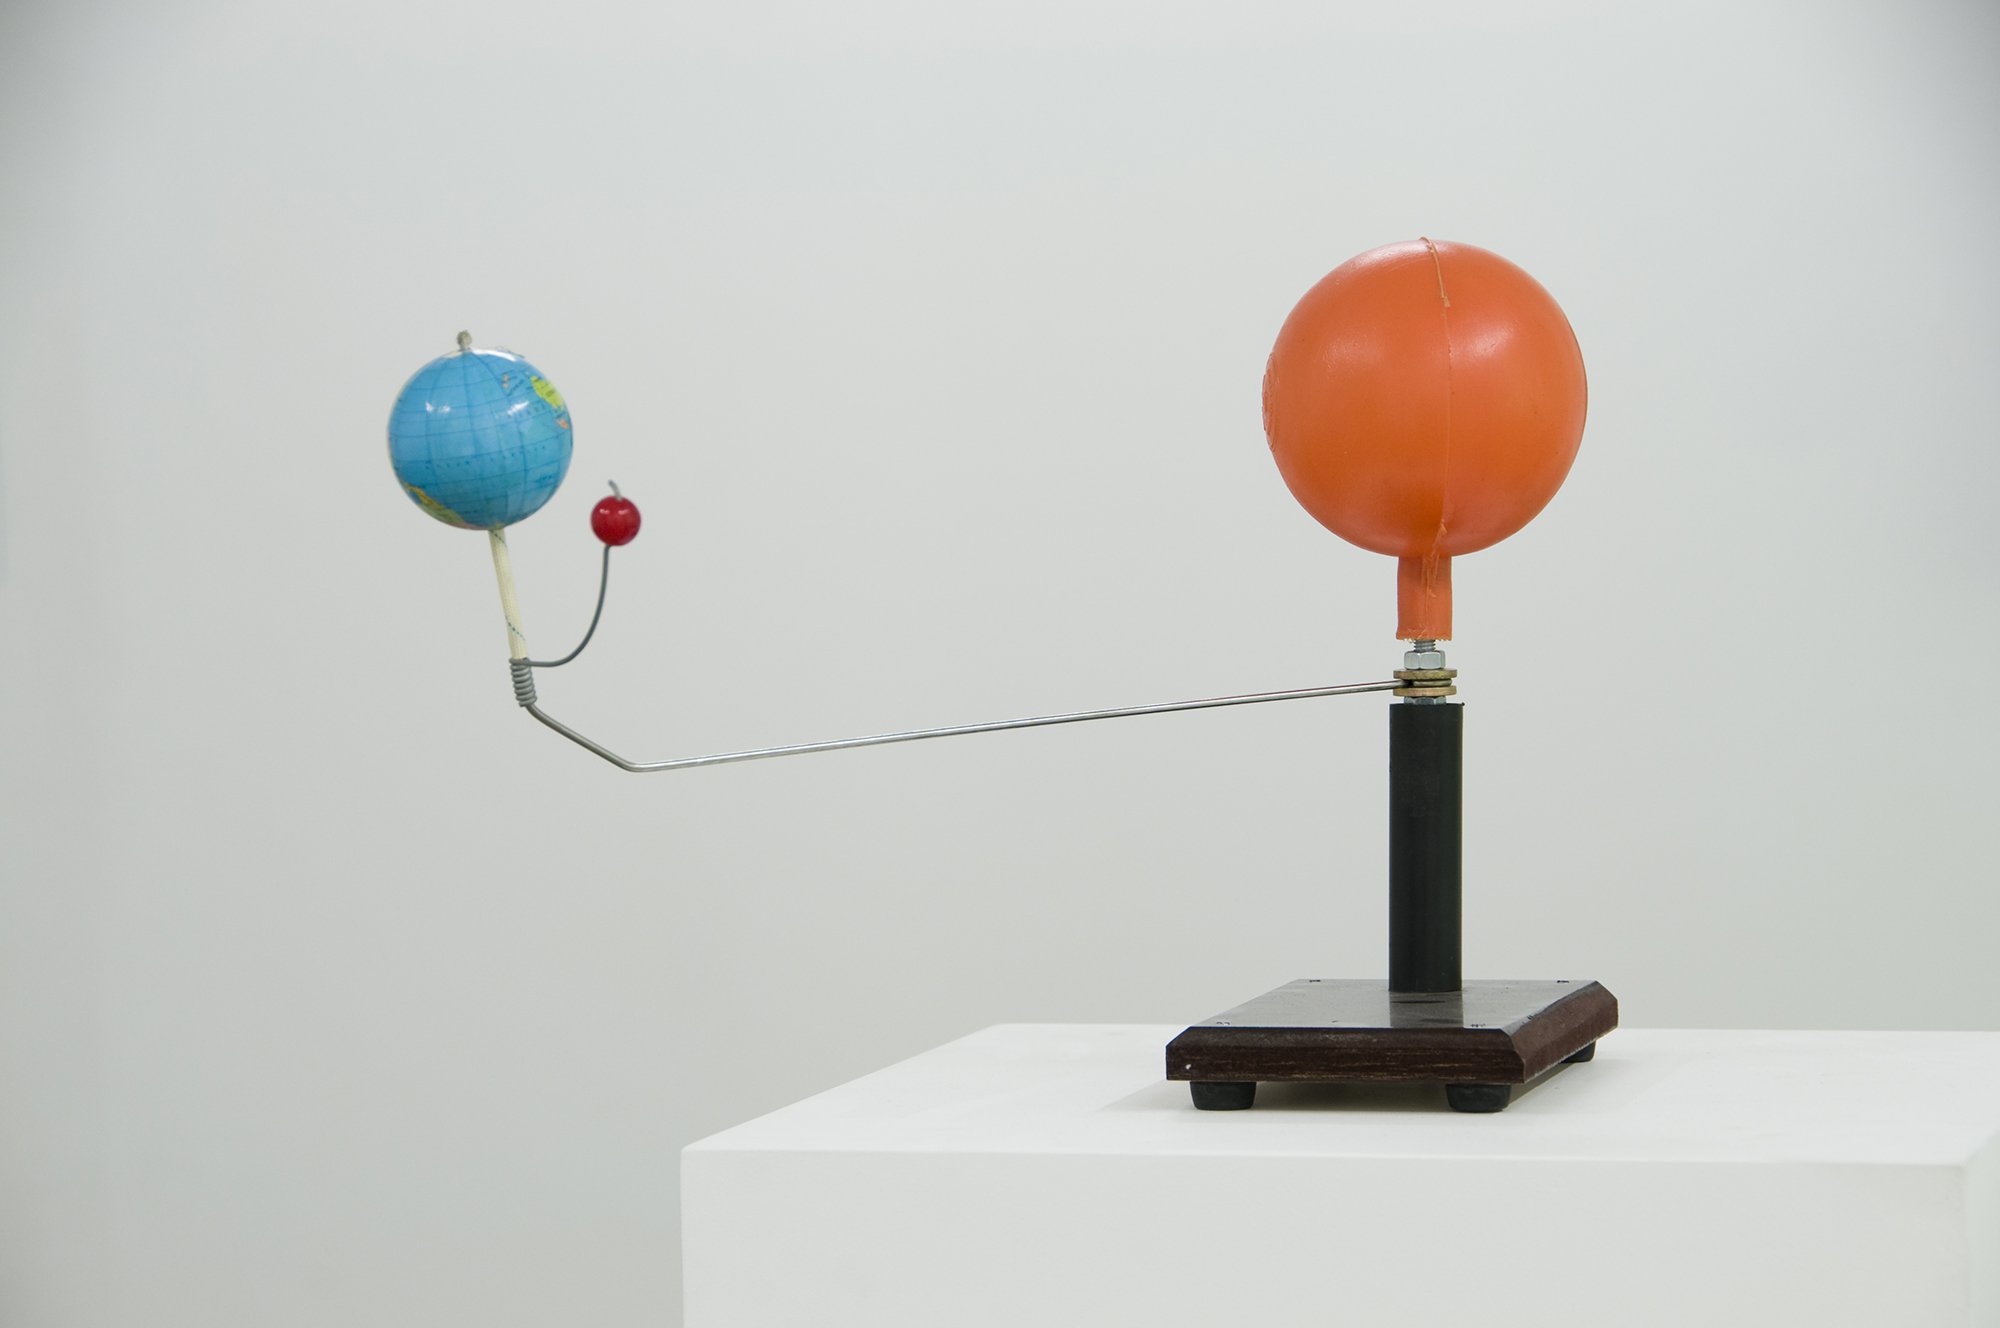 Banu Cennetoğlu, Earth, Moon and Sun, moving sculpture bought from an artist-scientist in Amman, 2011. Installation view, Constellation (or the inspiration show), Rodeo, Istanbul, 2011 – 2012